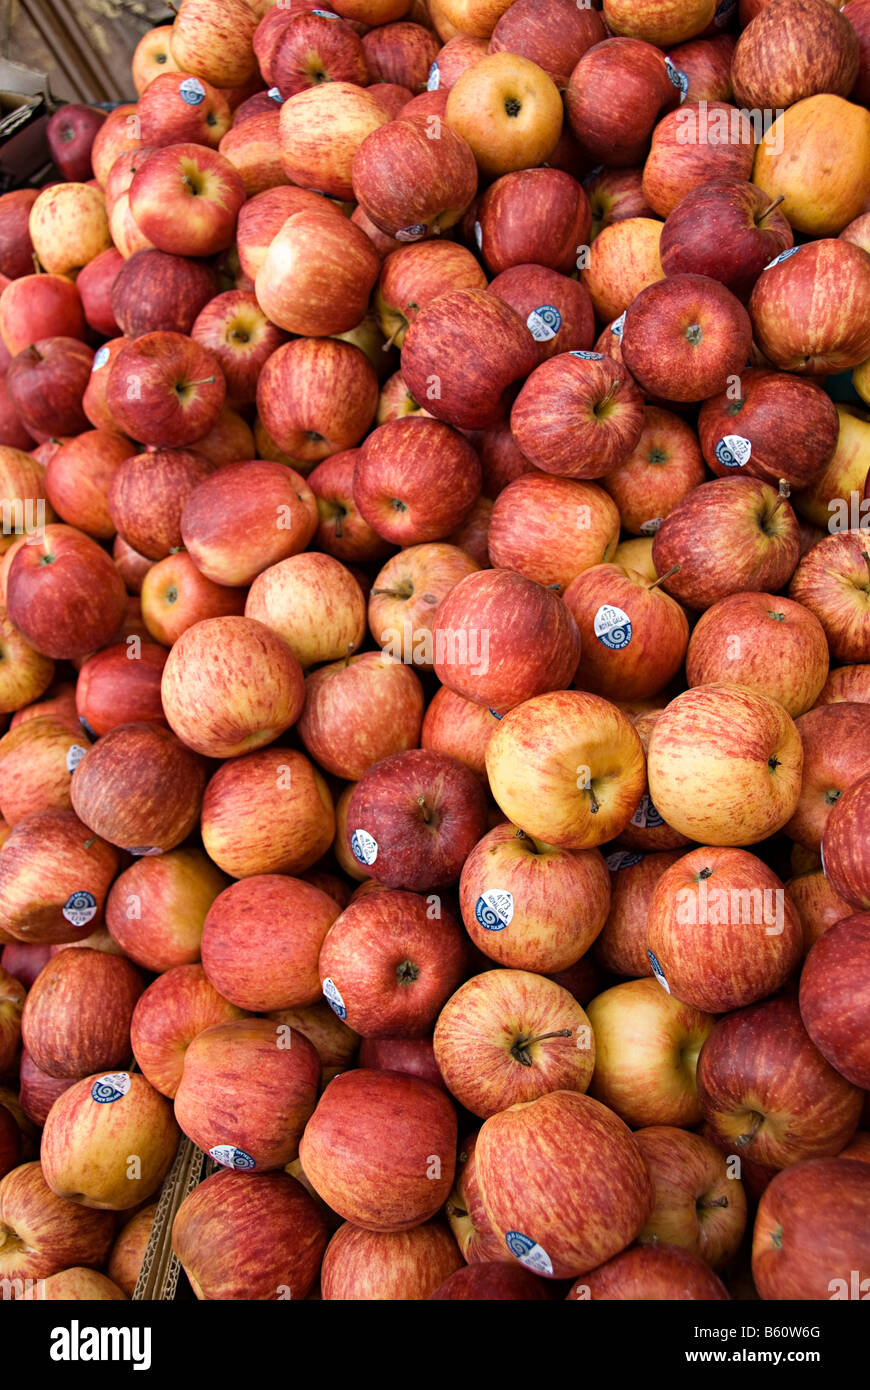 red apple group of apples Stock Photo